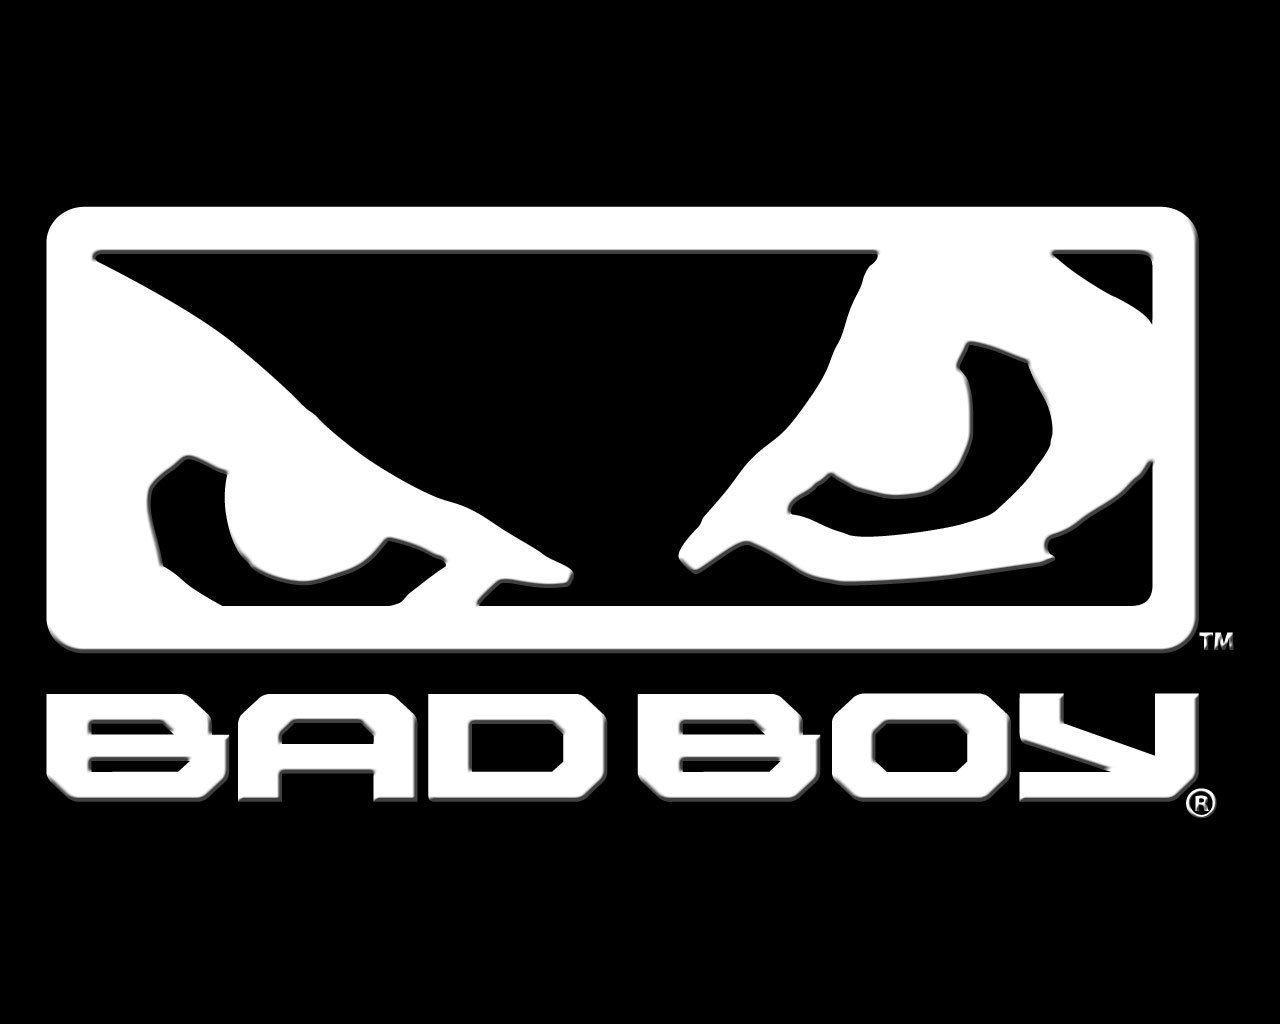 Bad Boy Download HD Wallpapers and Free Image